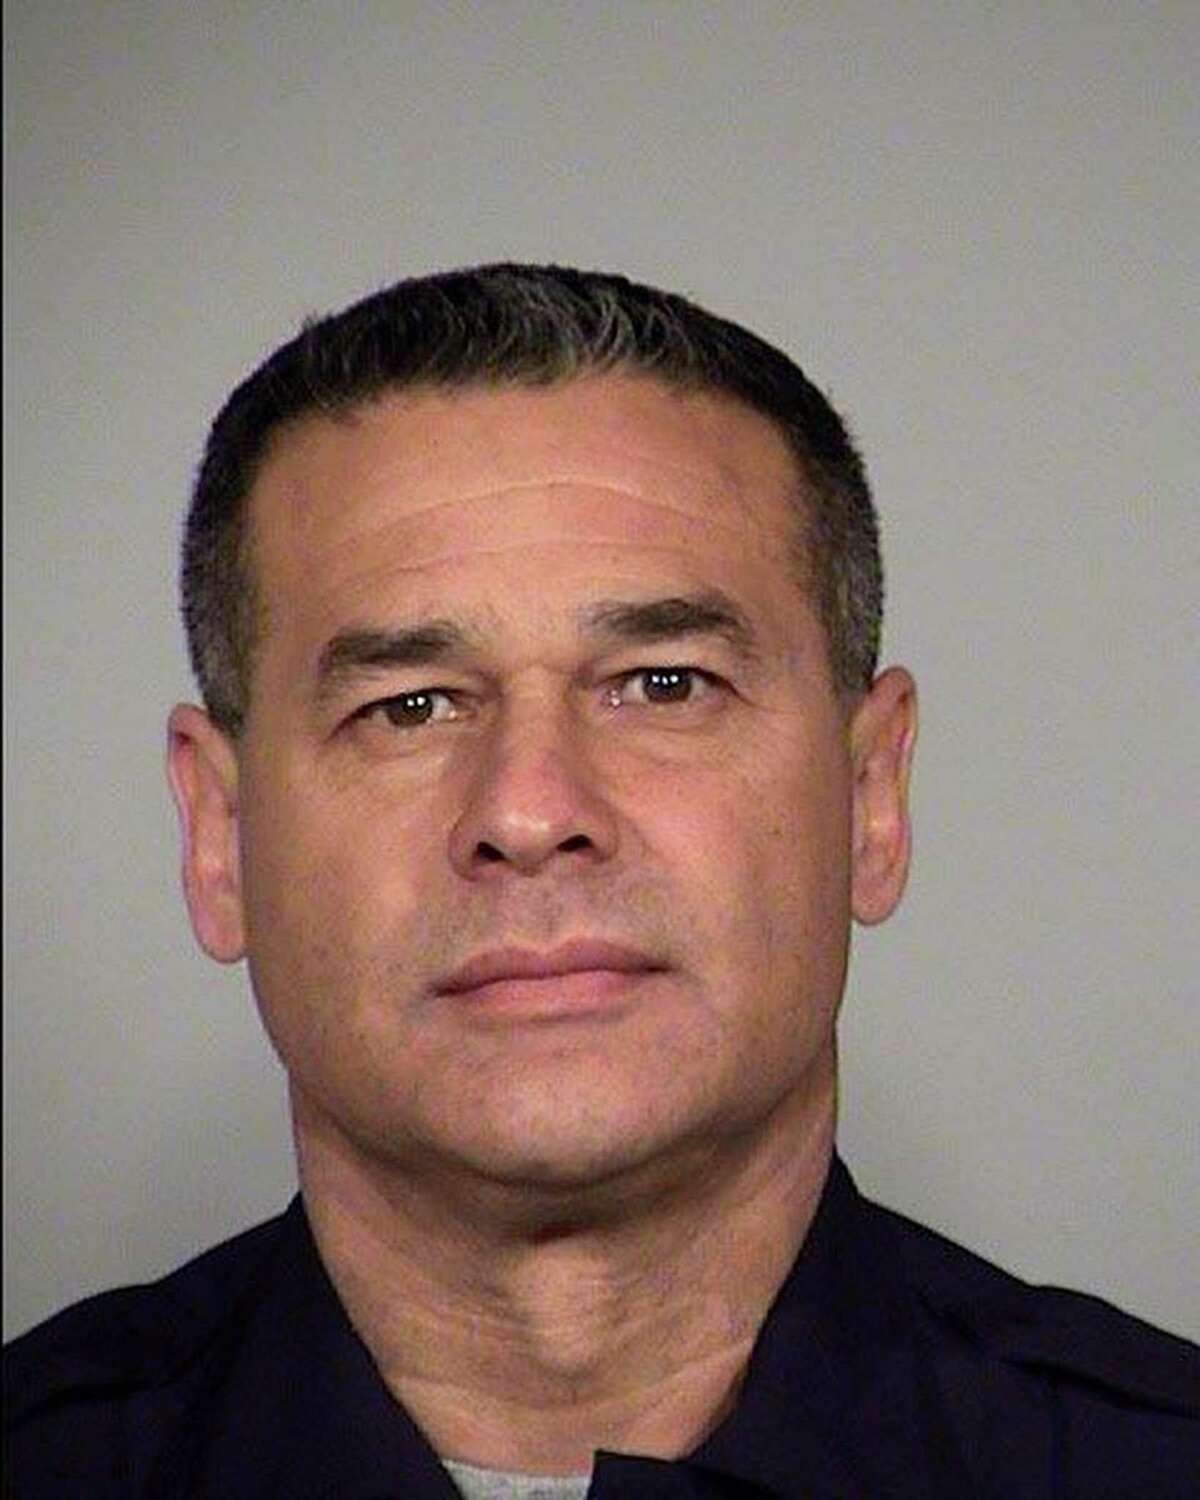 Det. Benjamin Marconi, Badge #2382, is seen in an undated San Antonio police department photo released Sunday, Nov. 20, 2016. Marconi, a 20 year veteran of SAPD, was killed Sunday after being shot in the head while making a traffic stop.